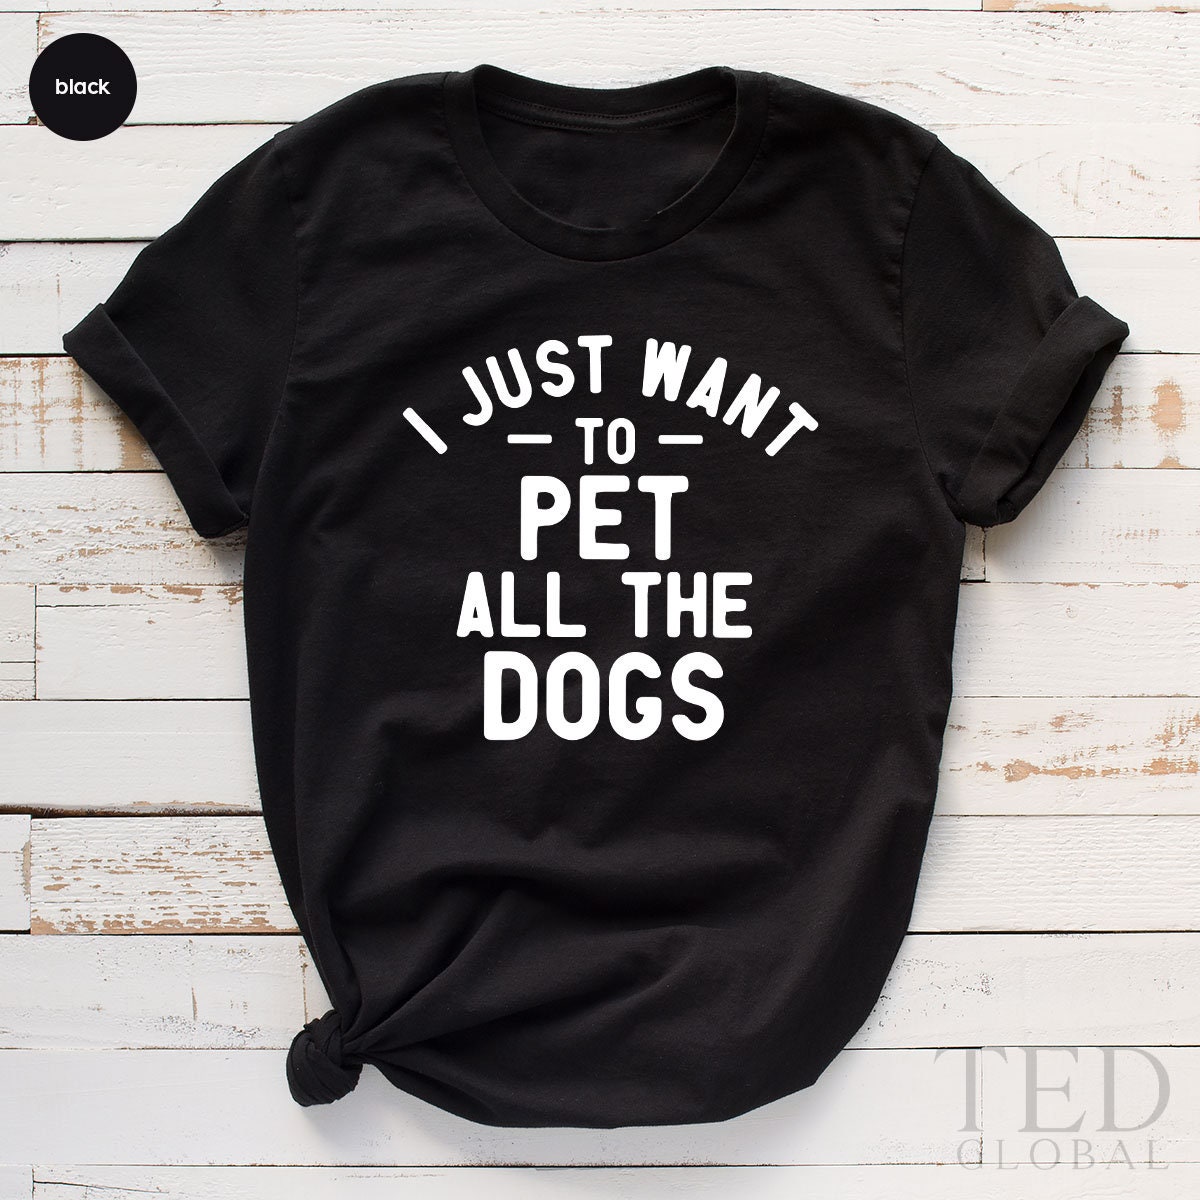 Pet Lover Shirt, Dog Mom Shirt, I Just Want To Pet All The Dogs, Gift For Dog Lovers, Animal Lover T-Shirt, Dog Dad TShirt, Dog Lover Gift - Fastdeliverytees.com